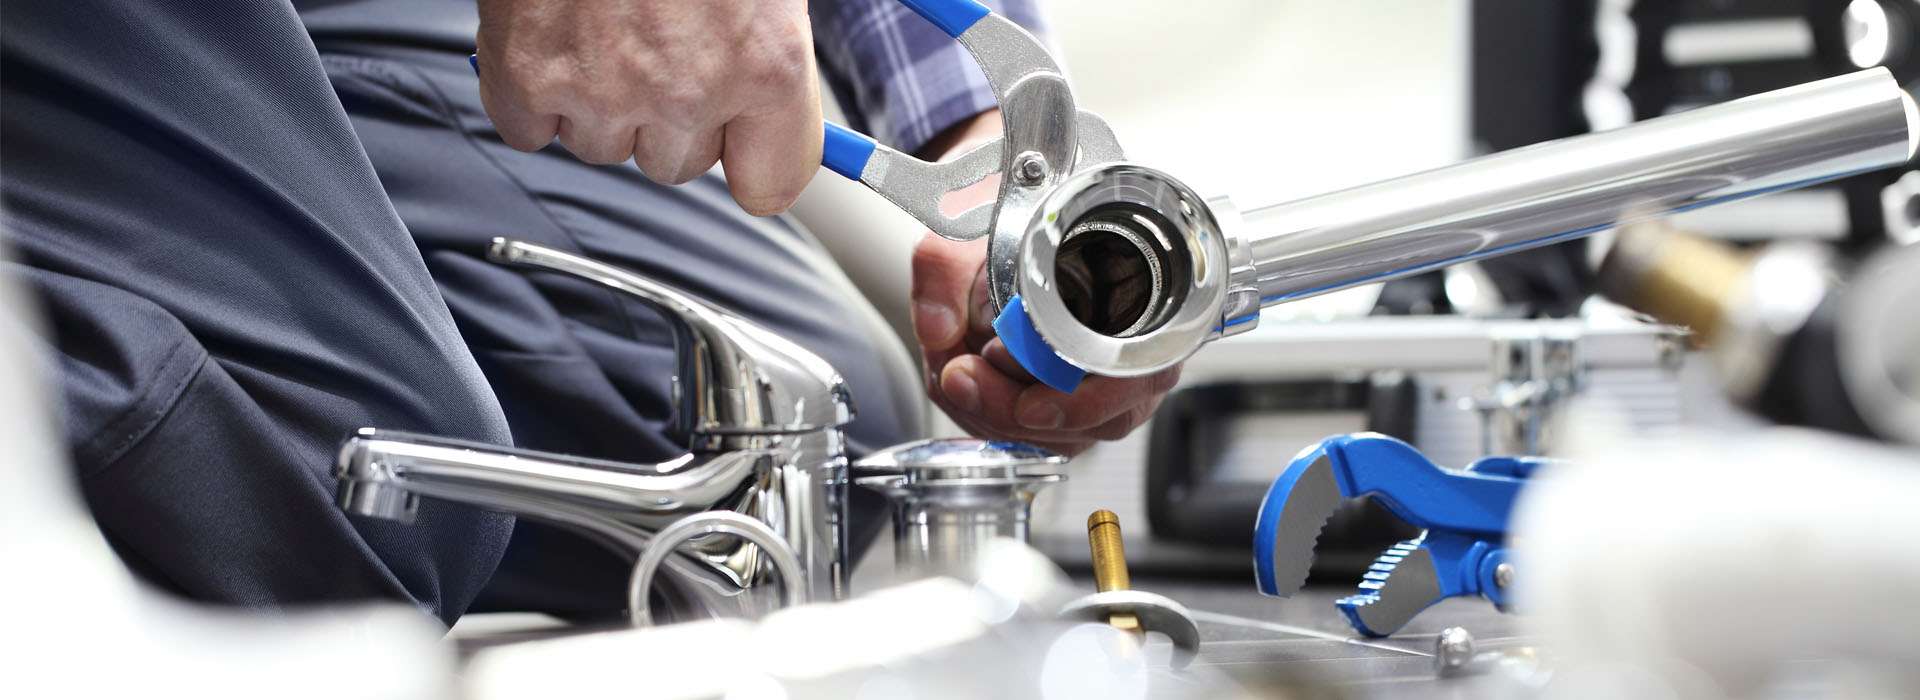 Plumbing Services in Chapel Hill NC